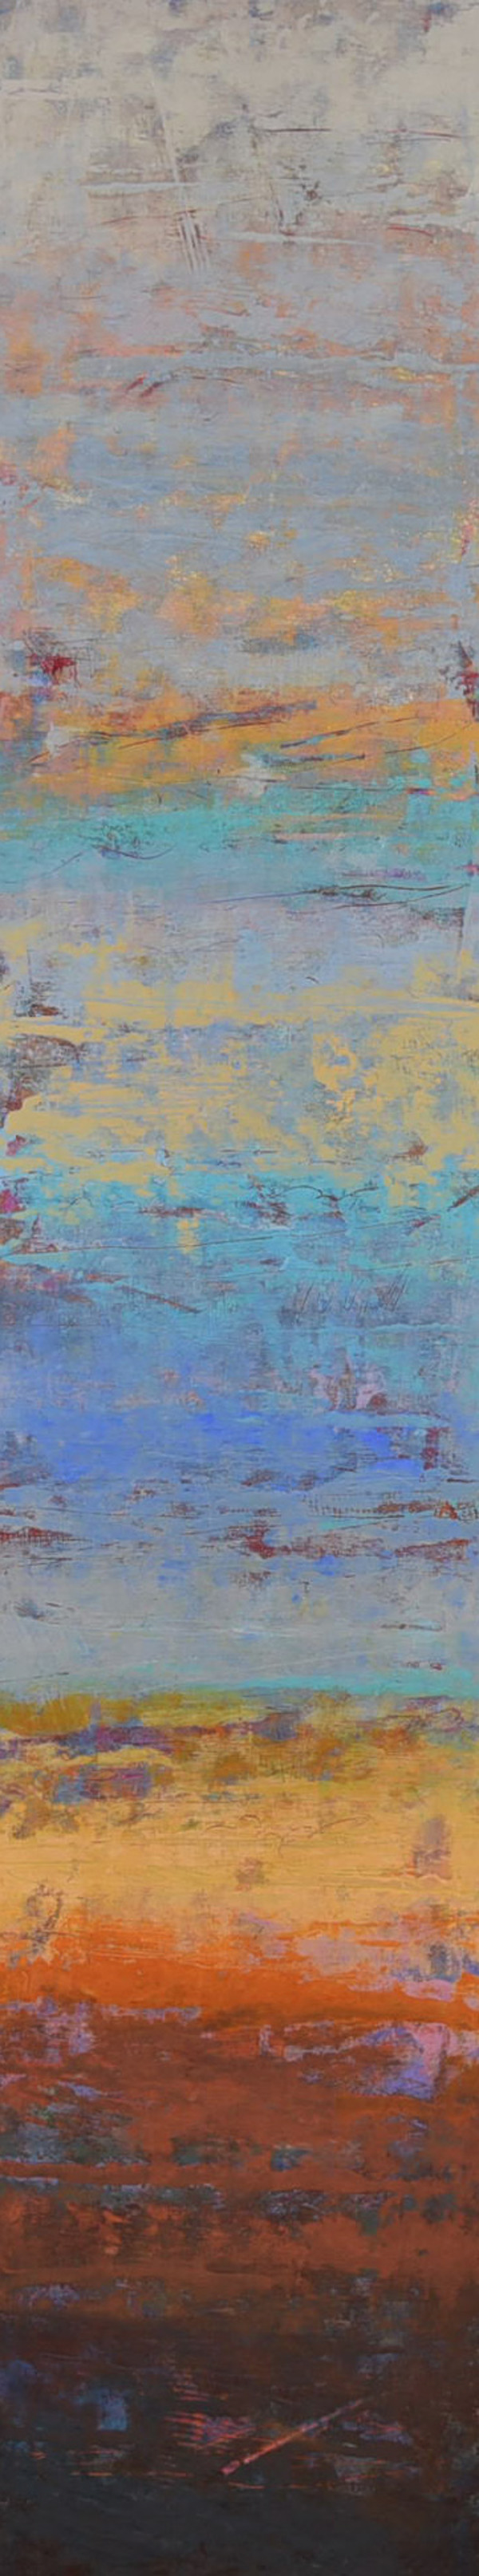 Holding Space in the Unknown 2, 60x12" by Ginnie Cappaert